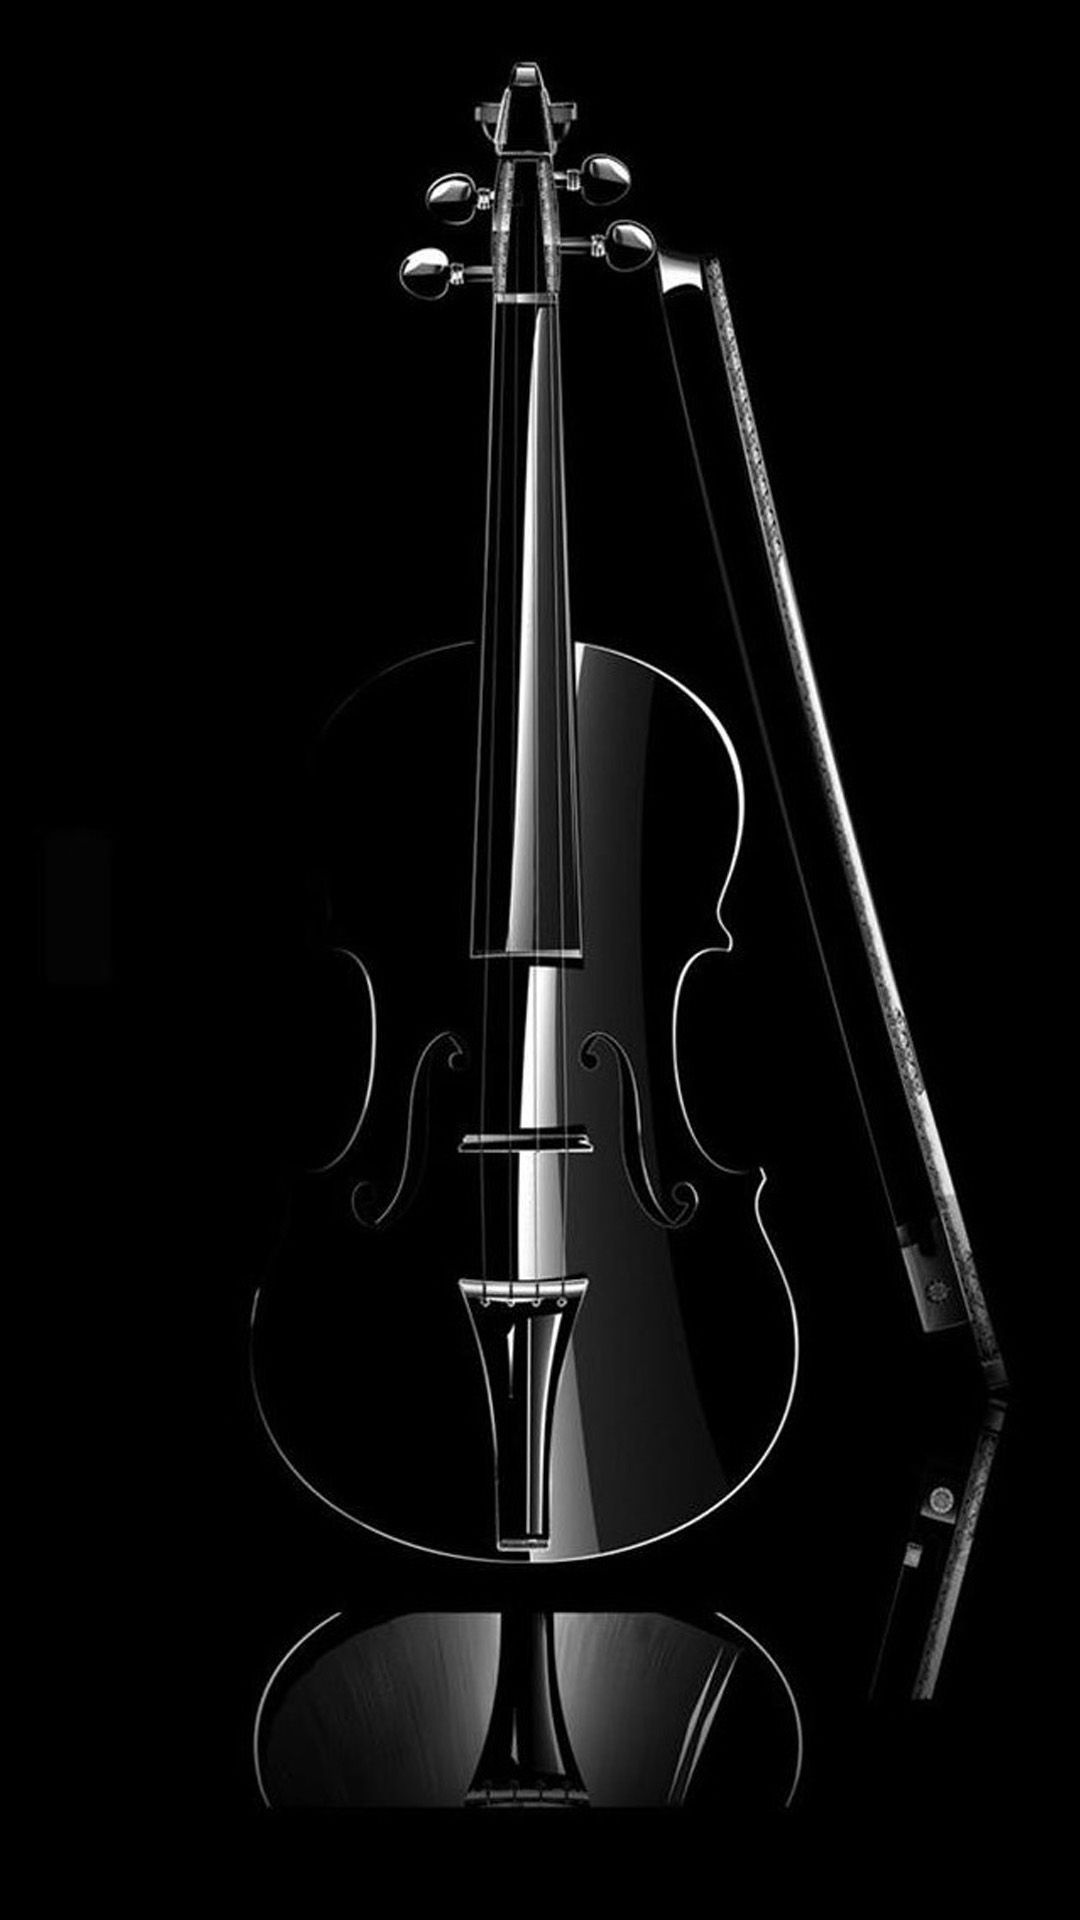 Violoncello: Black And White Design, Strict And Graceful Lines, Nowadays Art, Premier Violoncello. 1080x1920 Full HD Background.